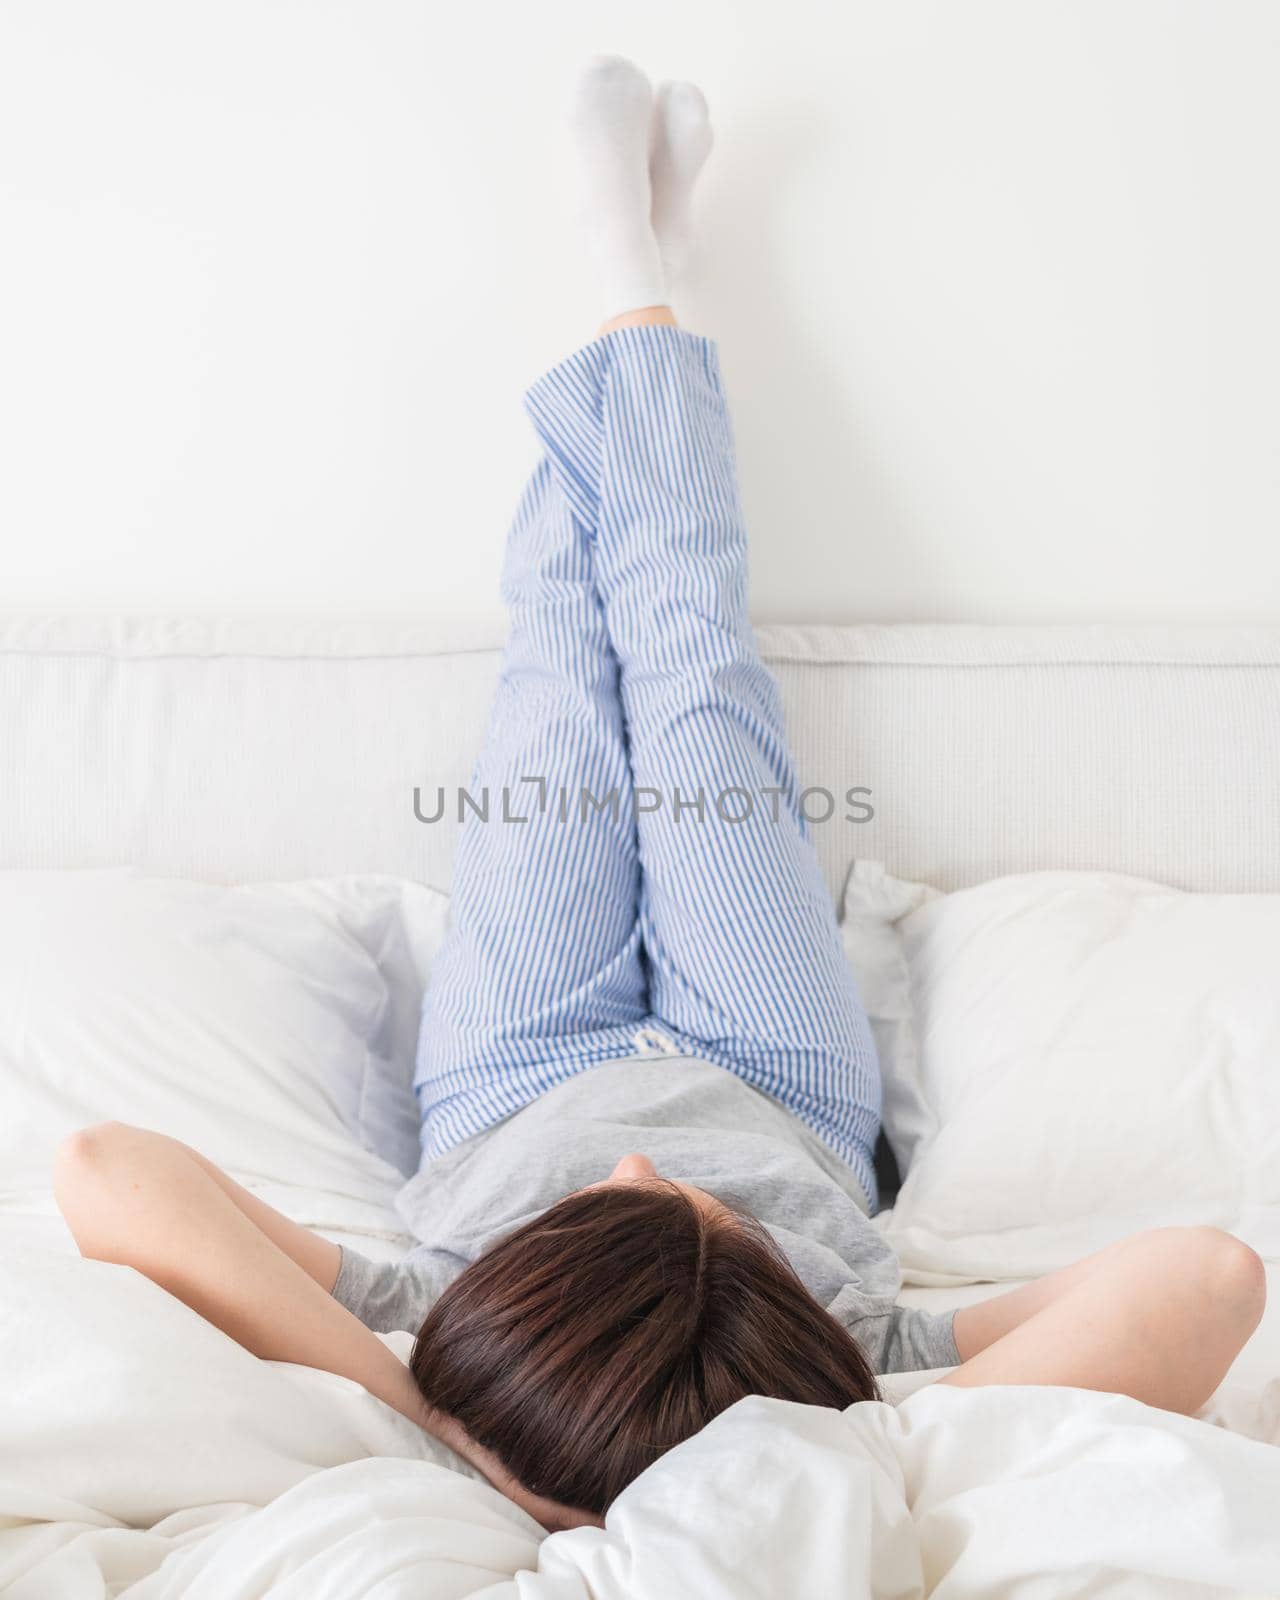 Female legs raised up high and arms under her head lying on bed in bedroom